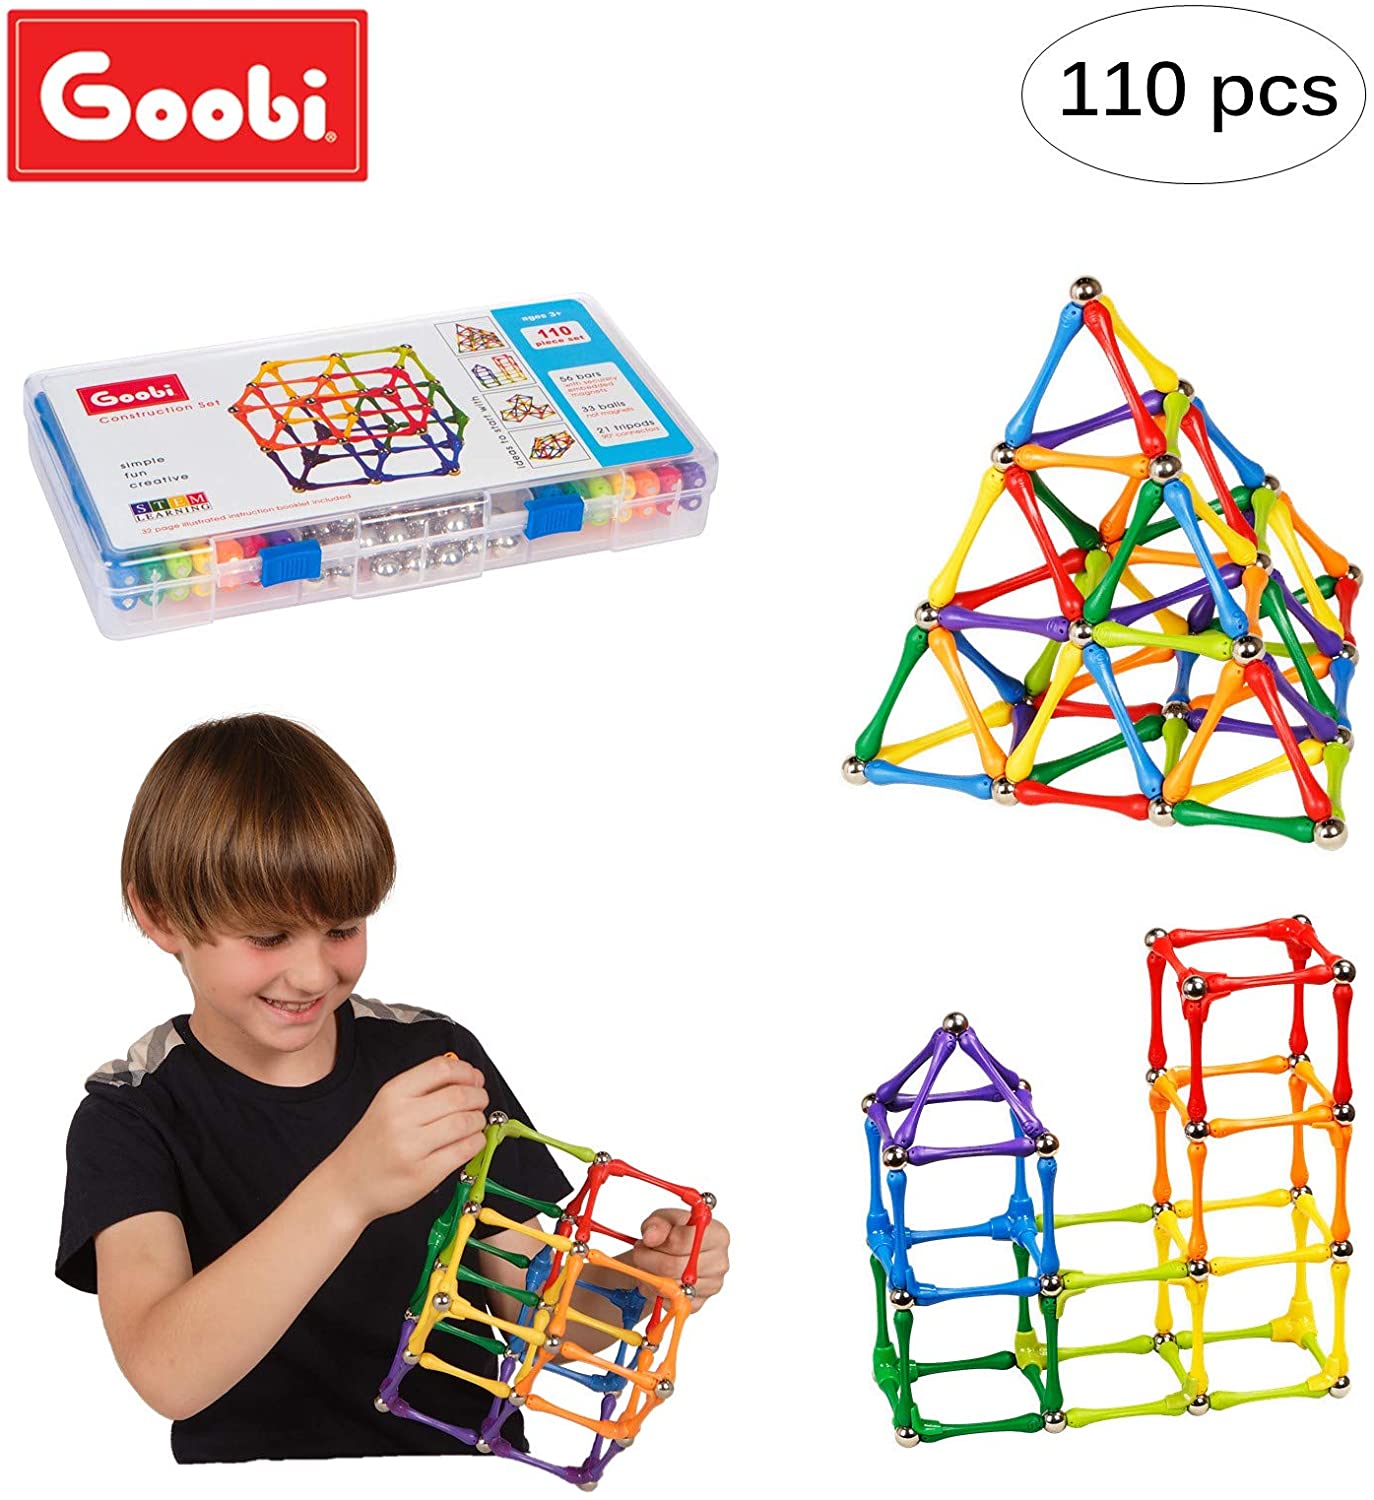 Goobi 110 Piece Construction Set Building Toy Active Play Sticks STEM Learning Creativity Imagination Children&rsquo;s 3D Puzzle Educational Brain Toys for Kids Boys and Girls with Instruction Booklet